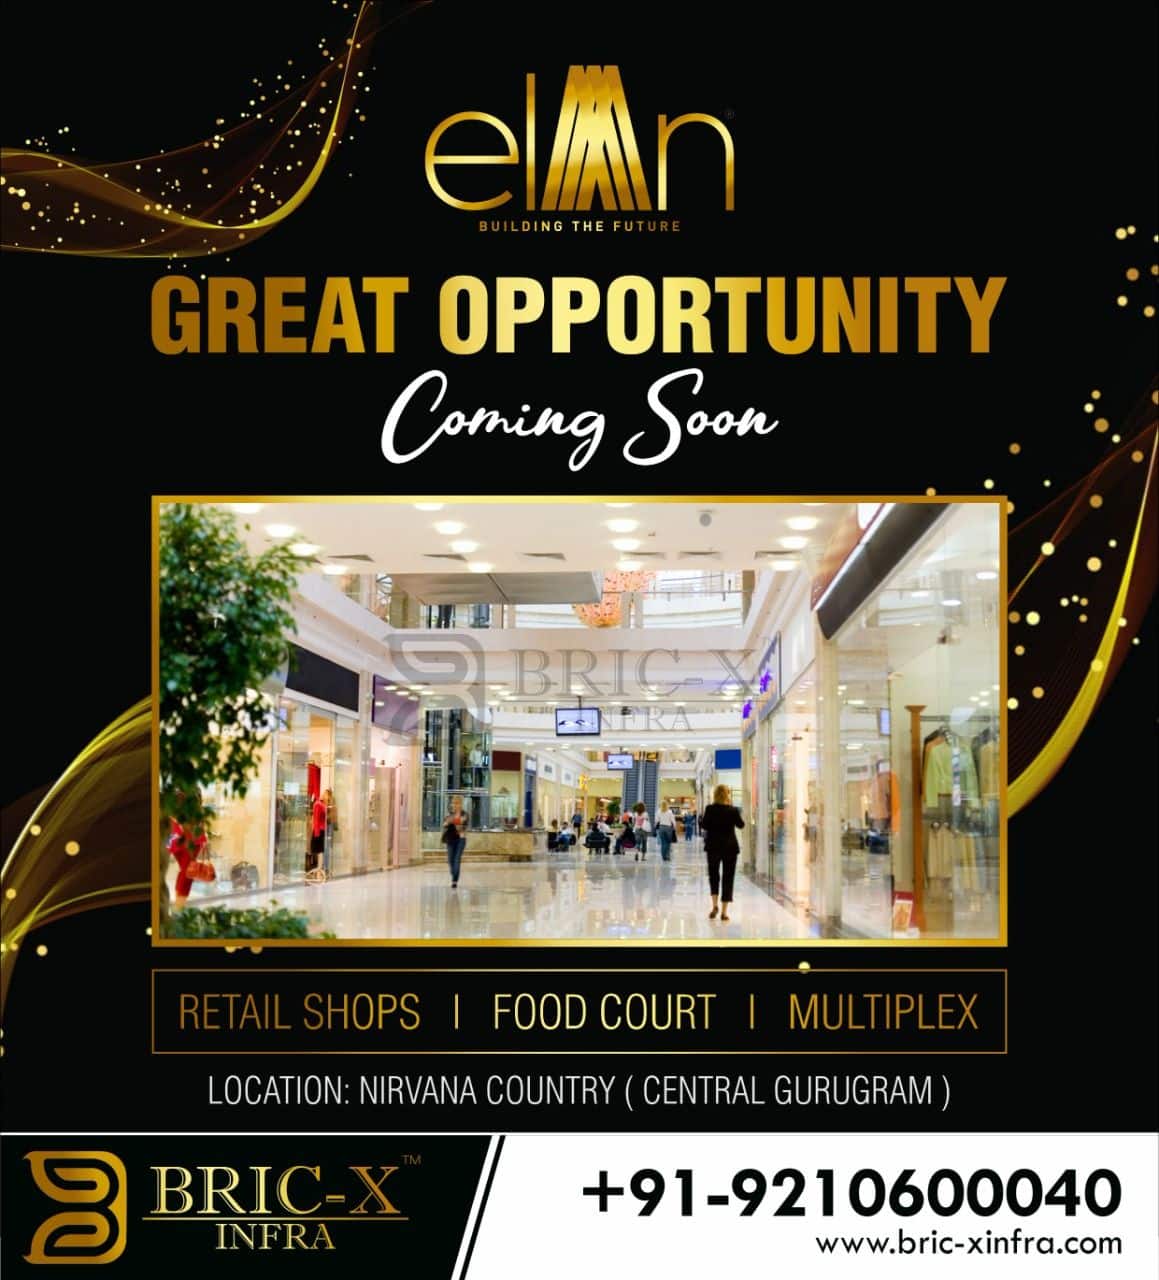 Great investment opportunity awaits you at Elan new commercial project ...